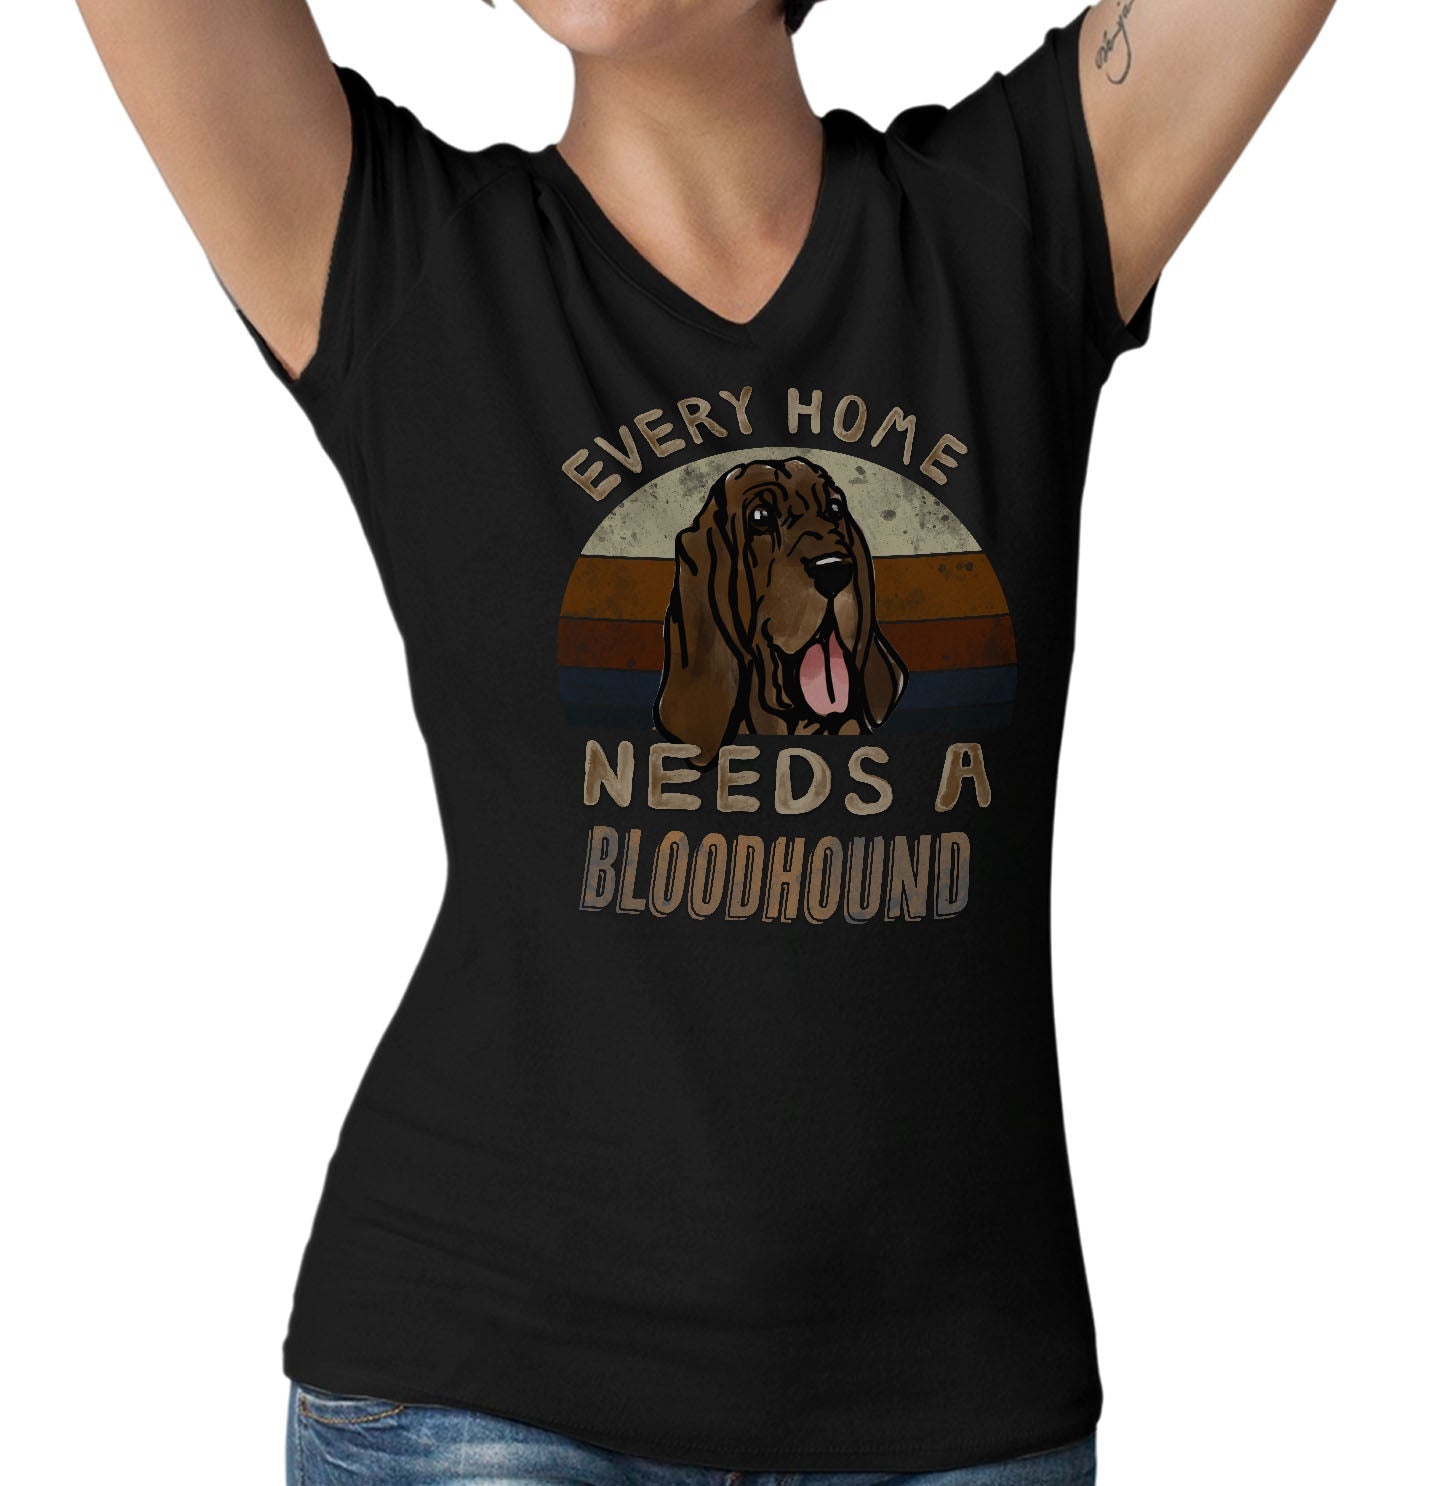 Every Home Needs a Bloodhound - Women's V-Neck T-Shirt